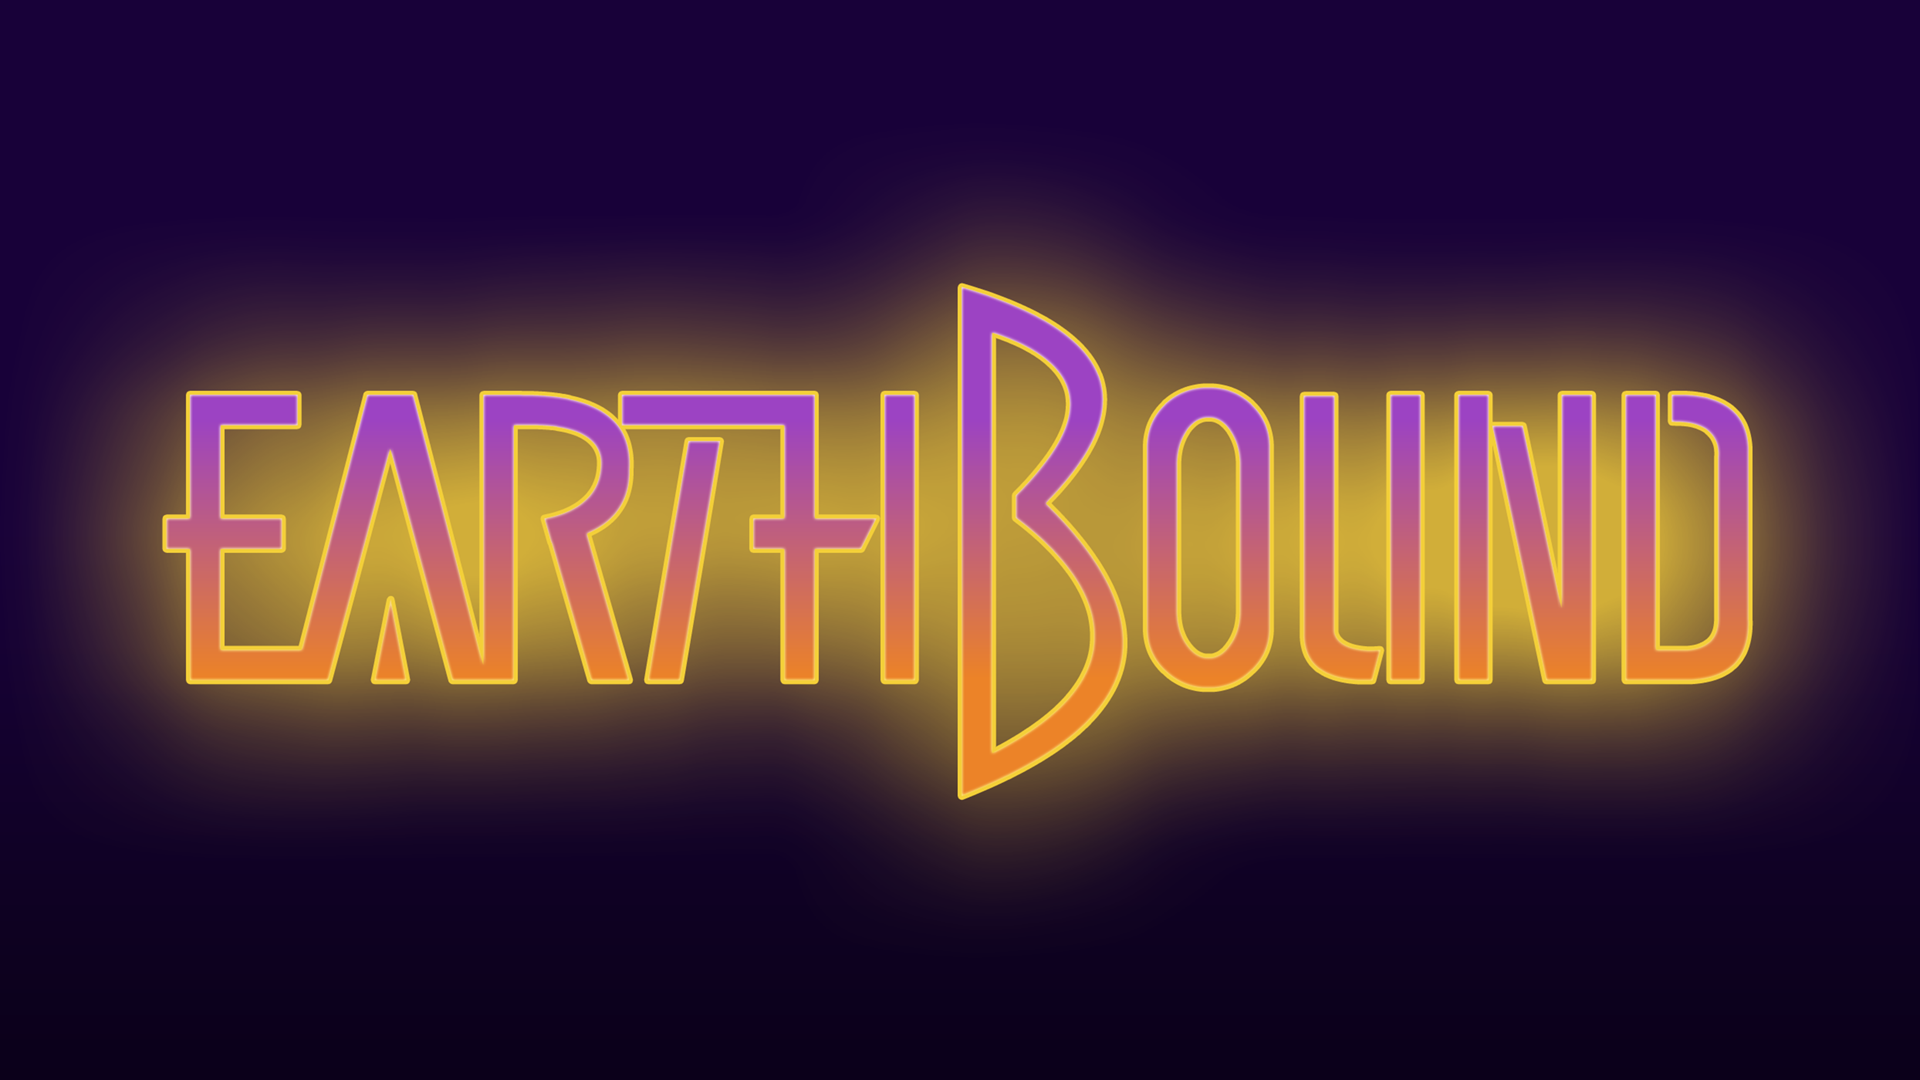 Earthbound Logo Wallpaper 1920x1080 by hocotate civ on 1920x1080